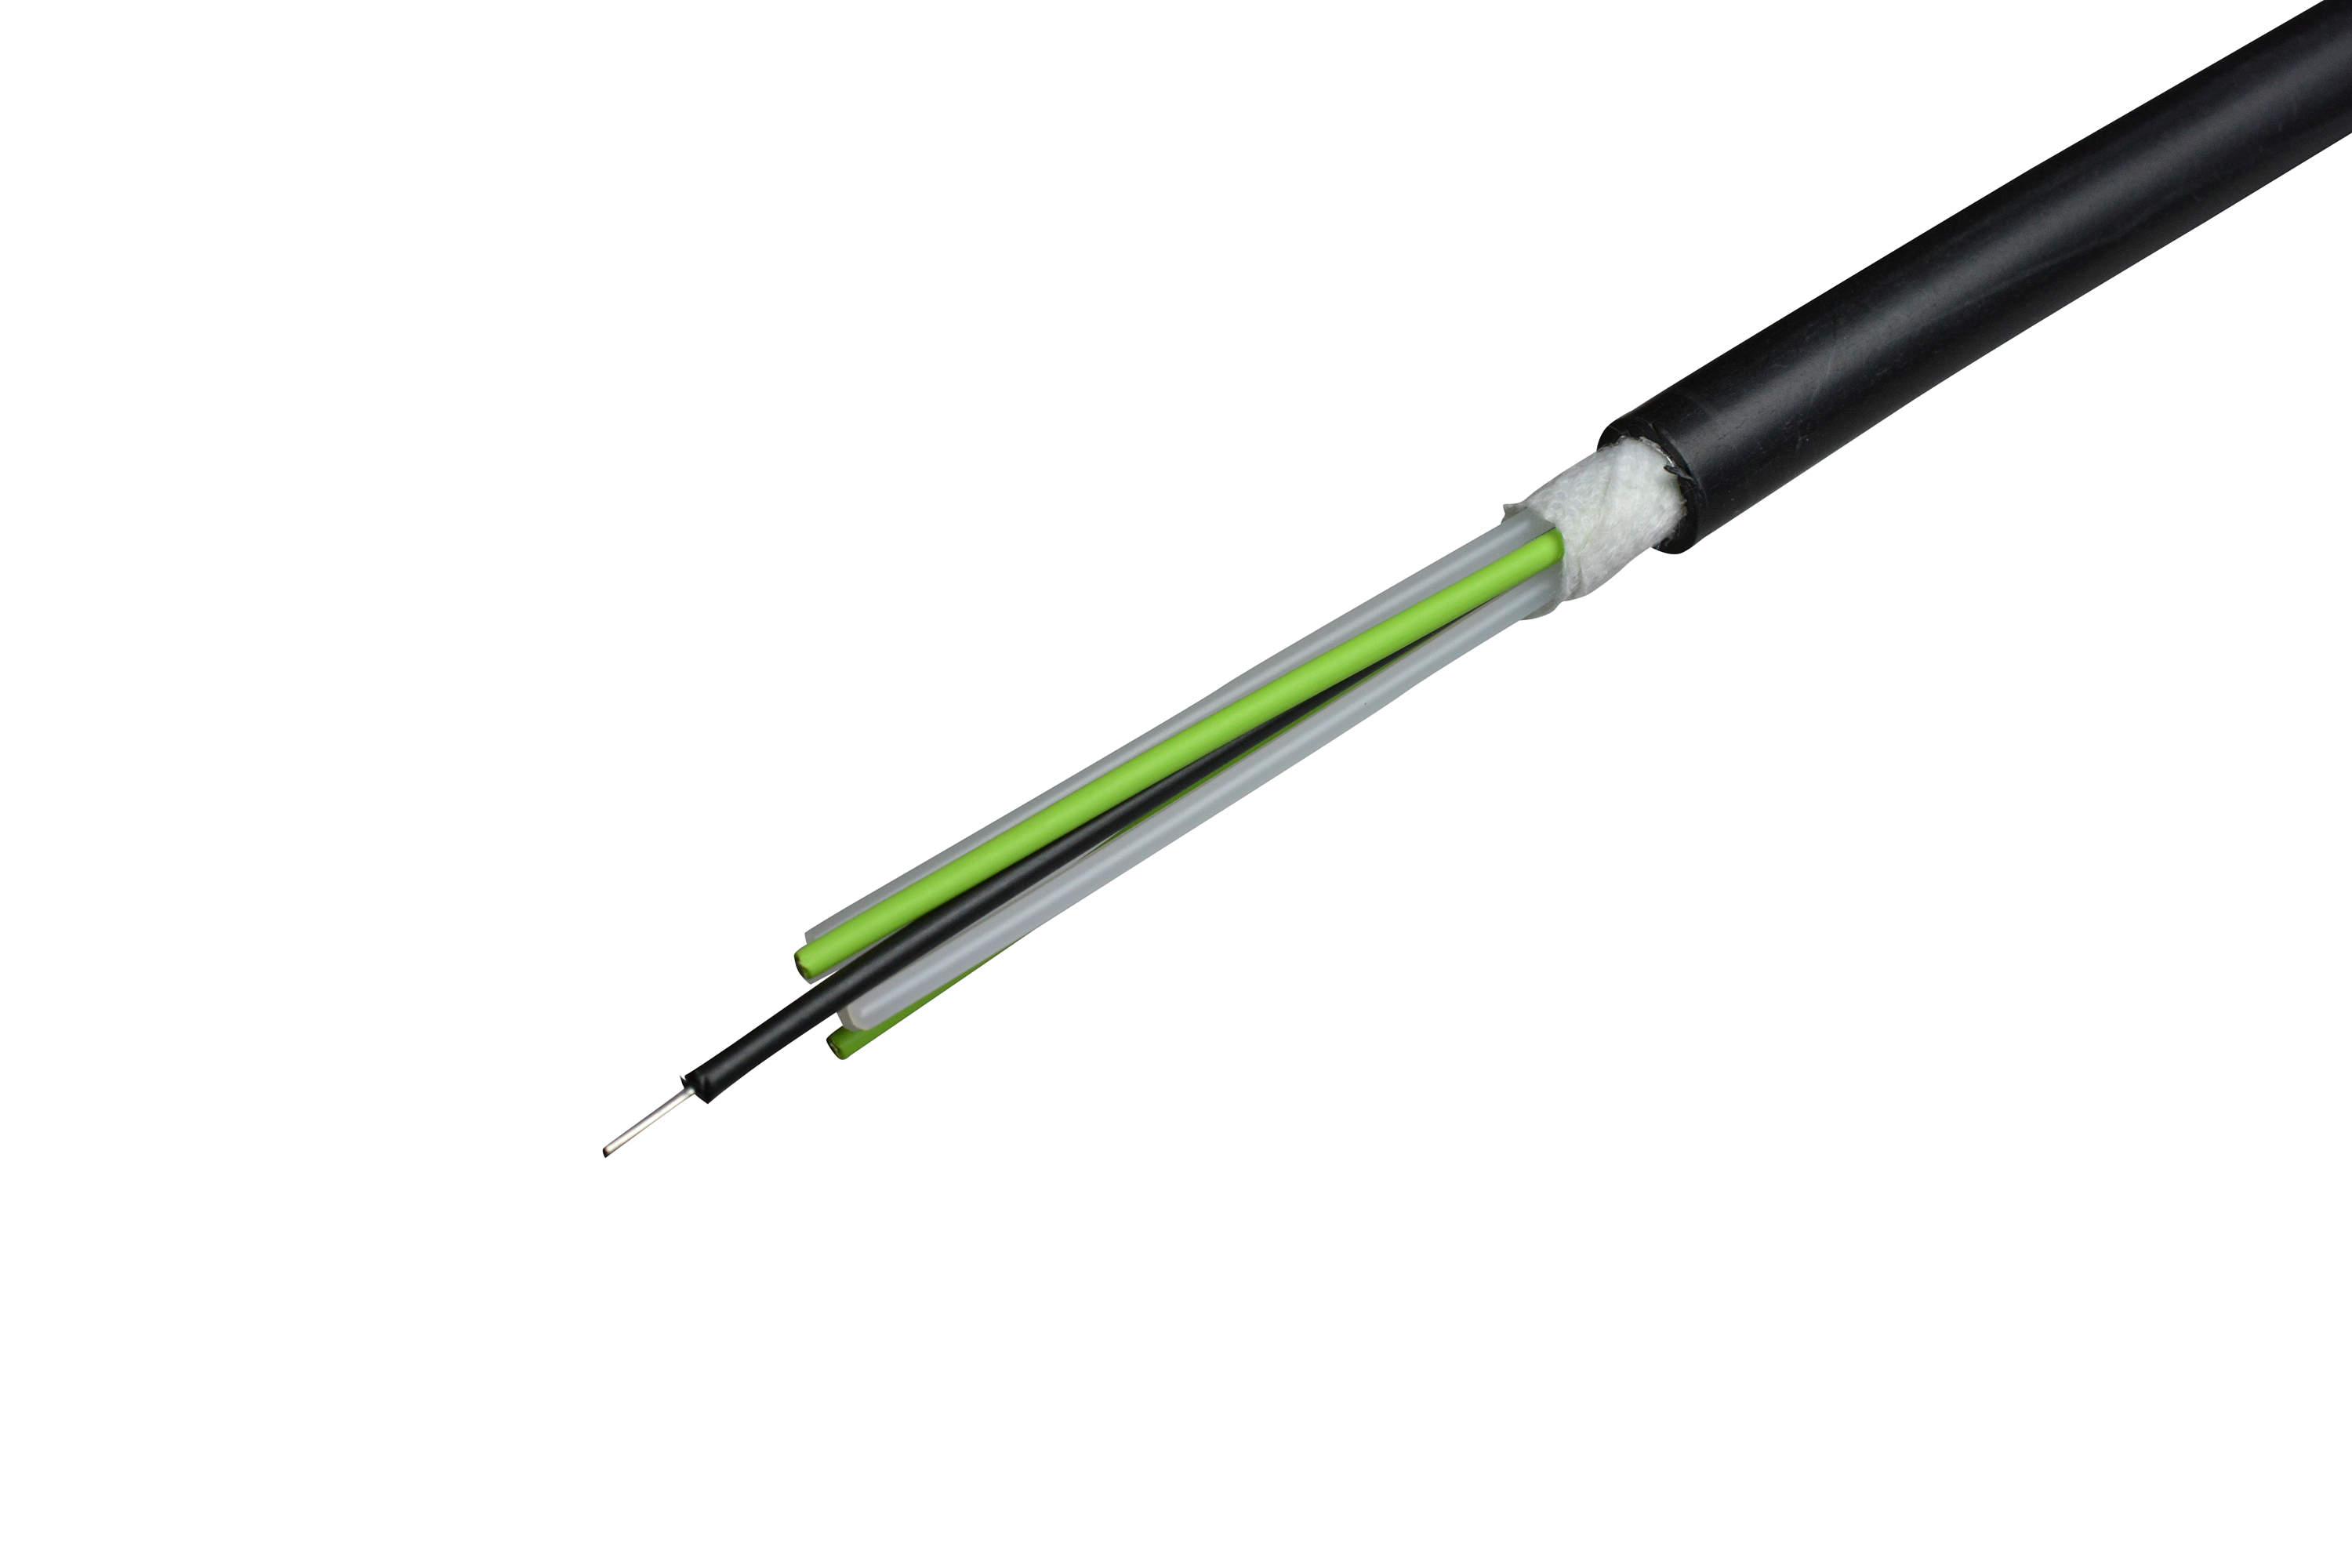 6cores,OM3,Unitized Round Type Fiber Optic Cable for Indoor and OutdoorUse.